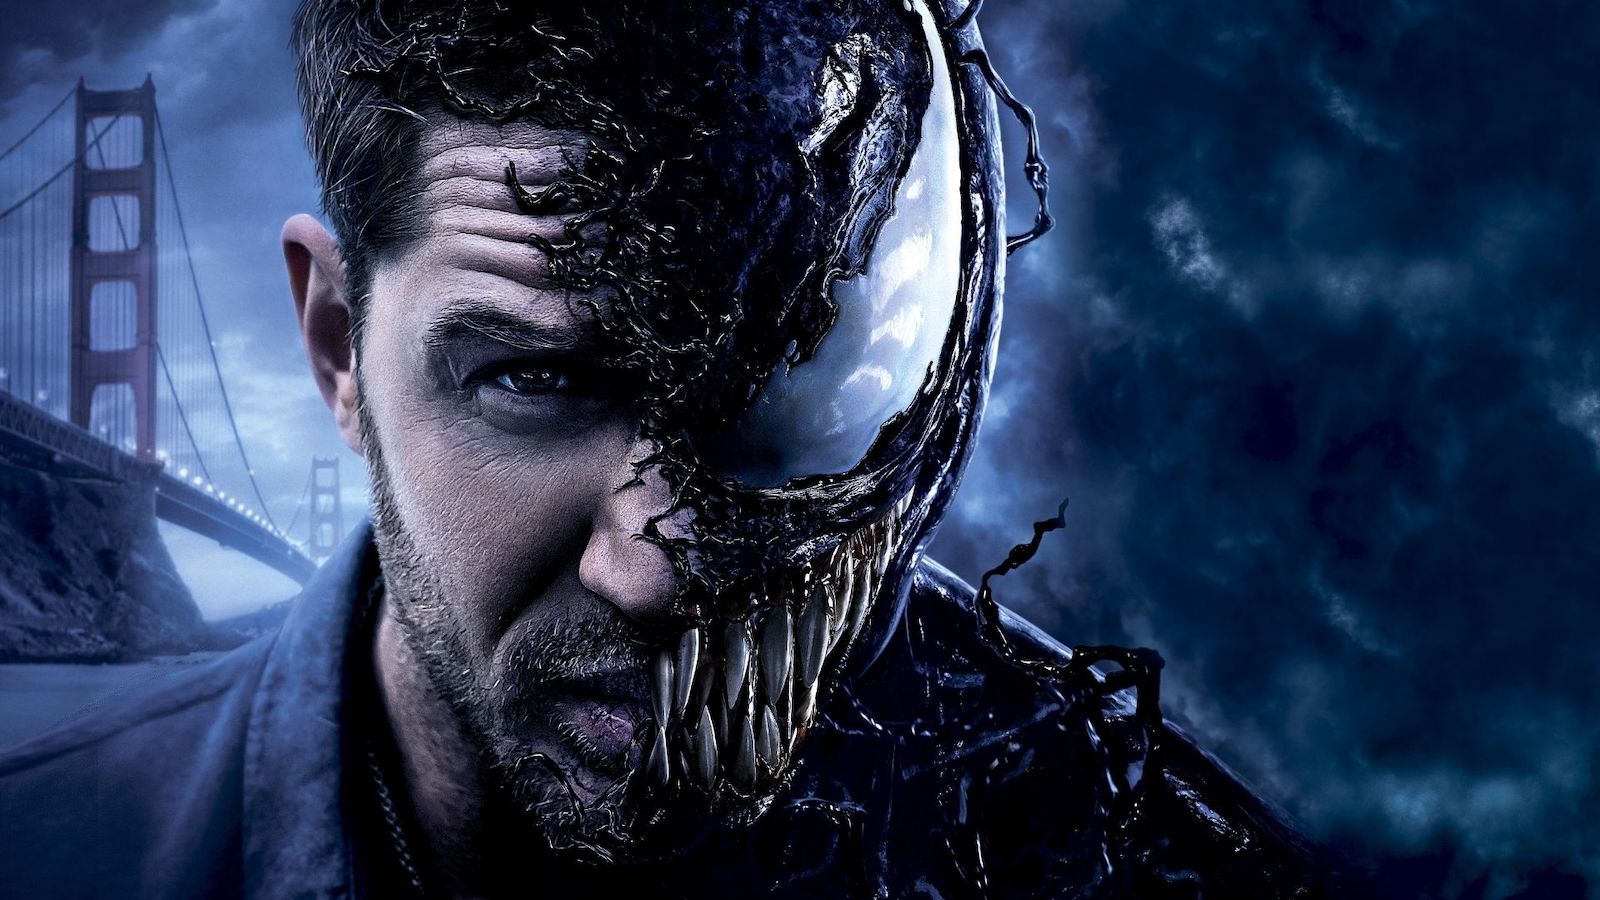 Venom 3: the first photos from the set reveal the new setting of the Sony film